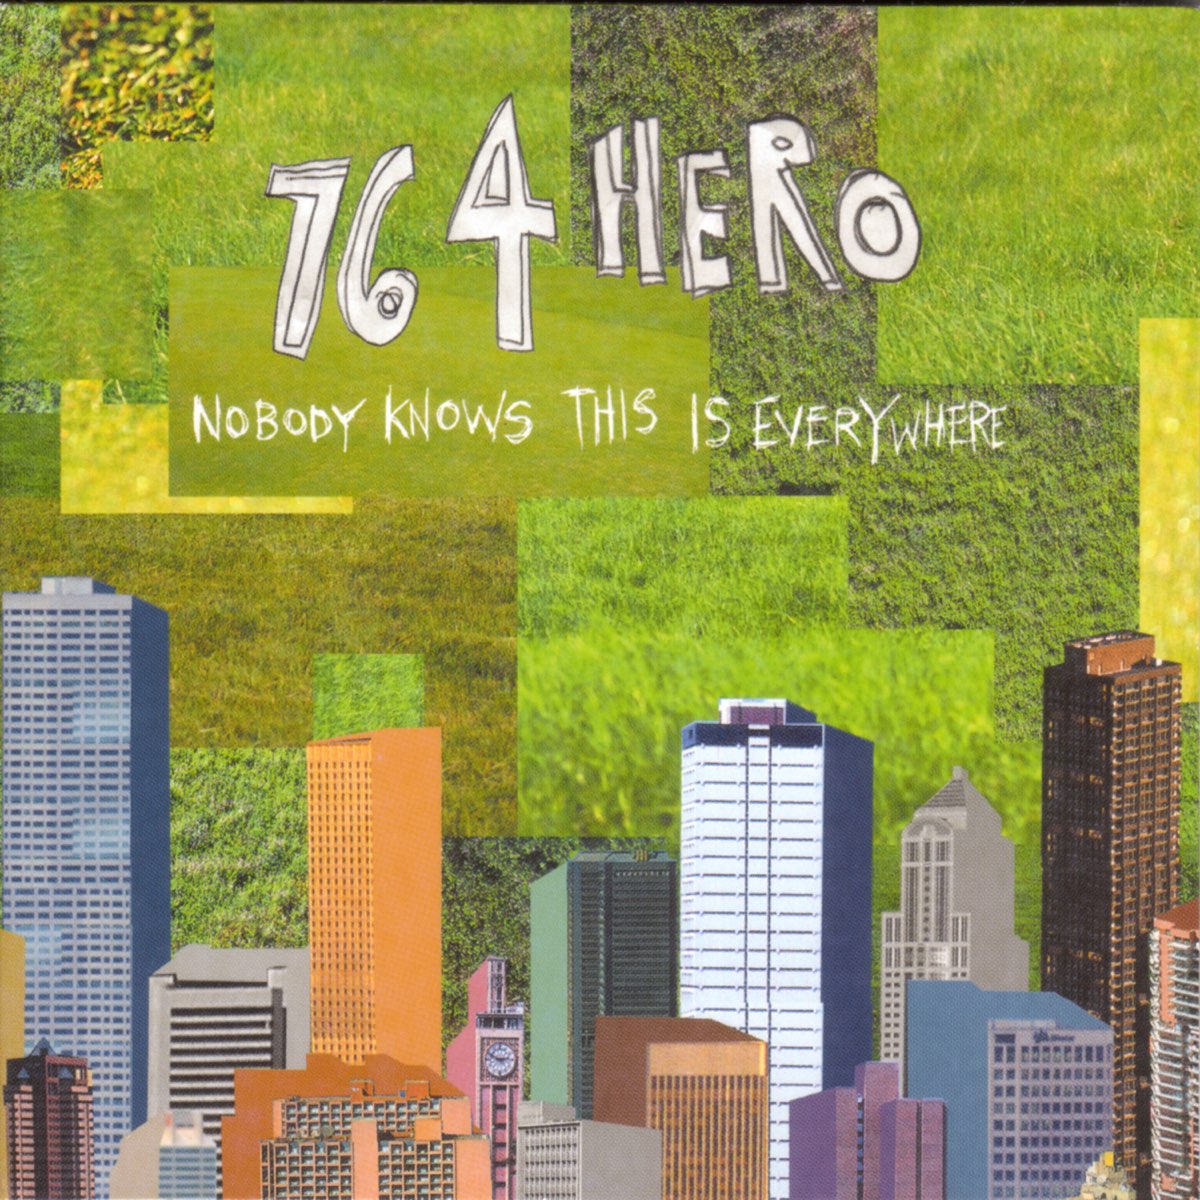 764 Hero – Nobody Knows This Is Everywhere